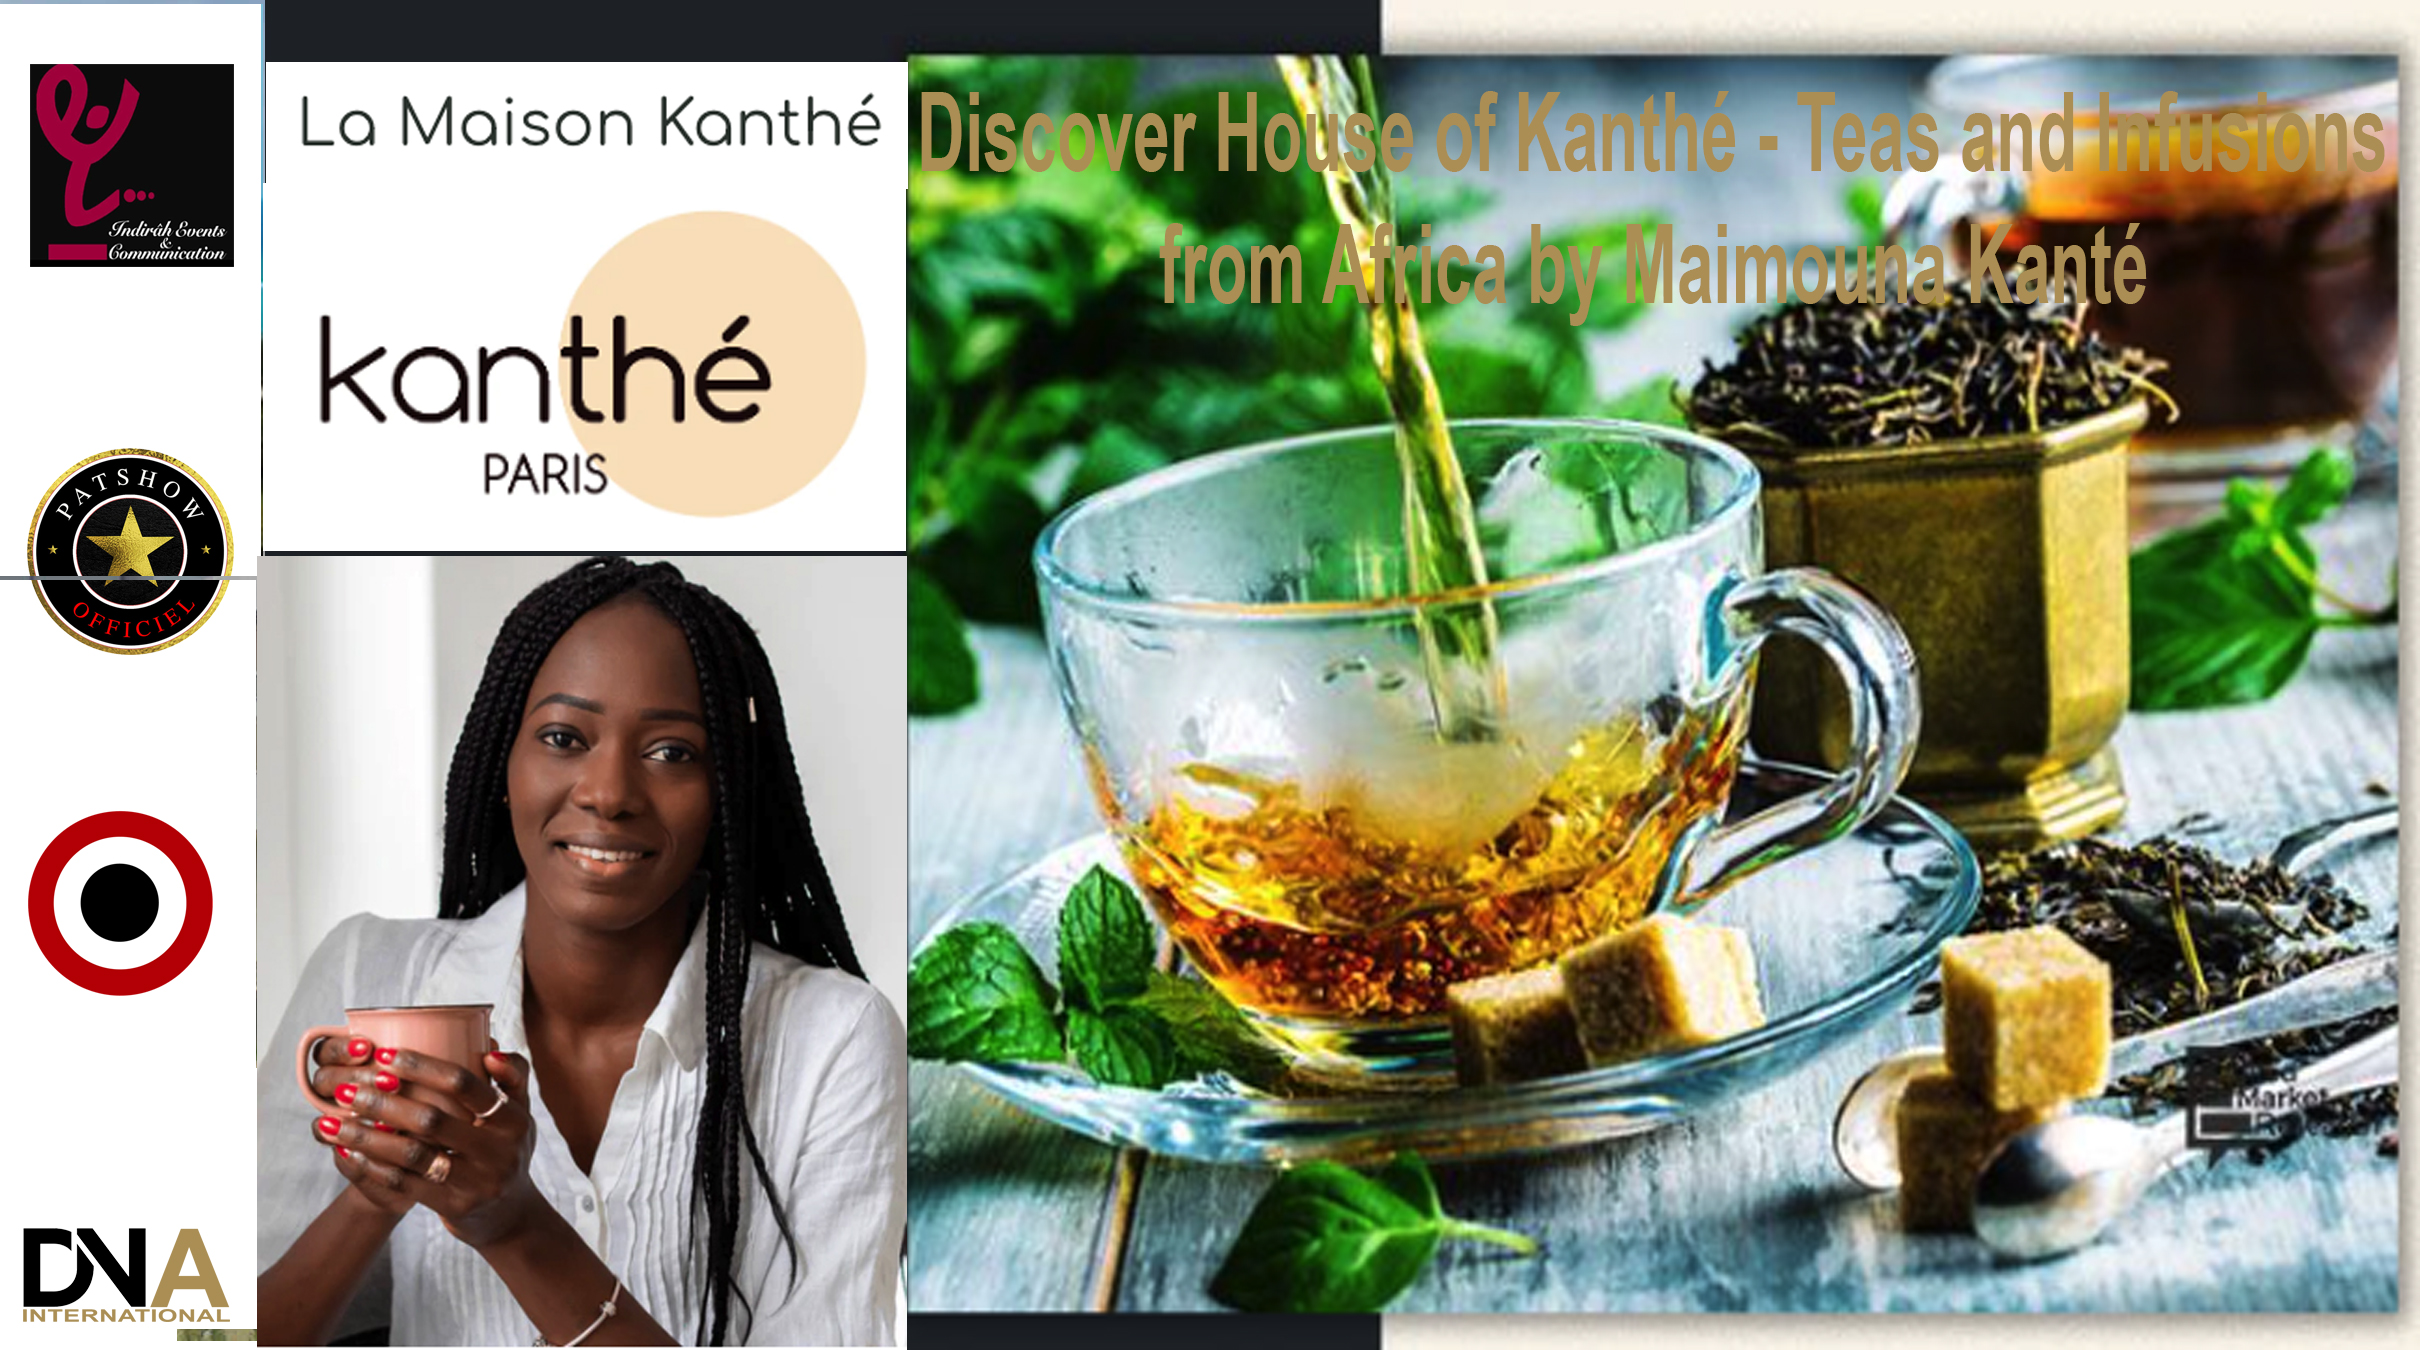 House of Kanthé - Teas and from by Maimouna Kanté - DN-AFRICA Magazine